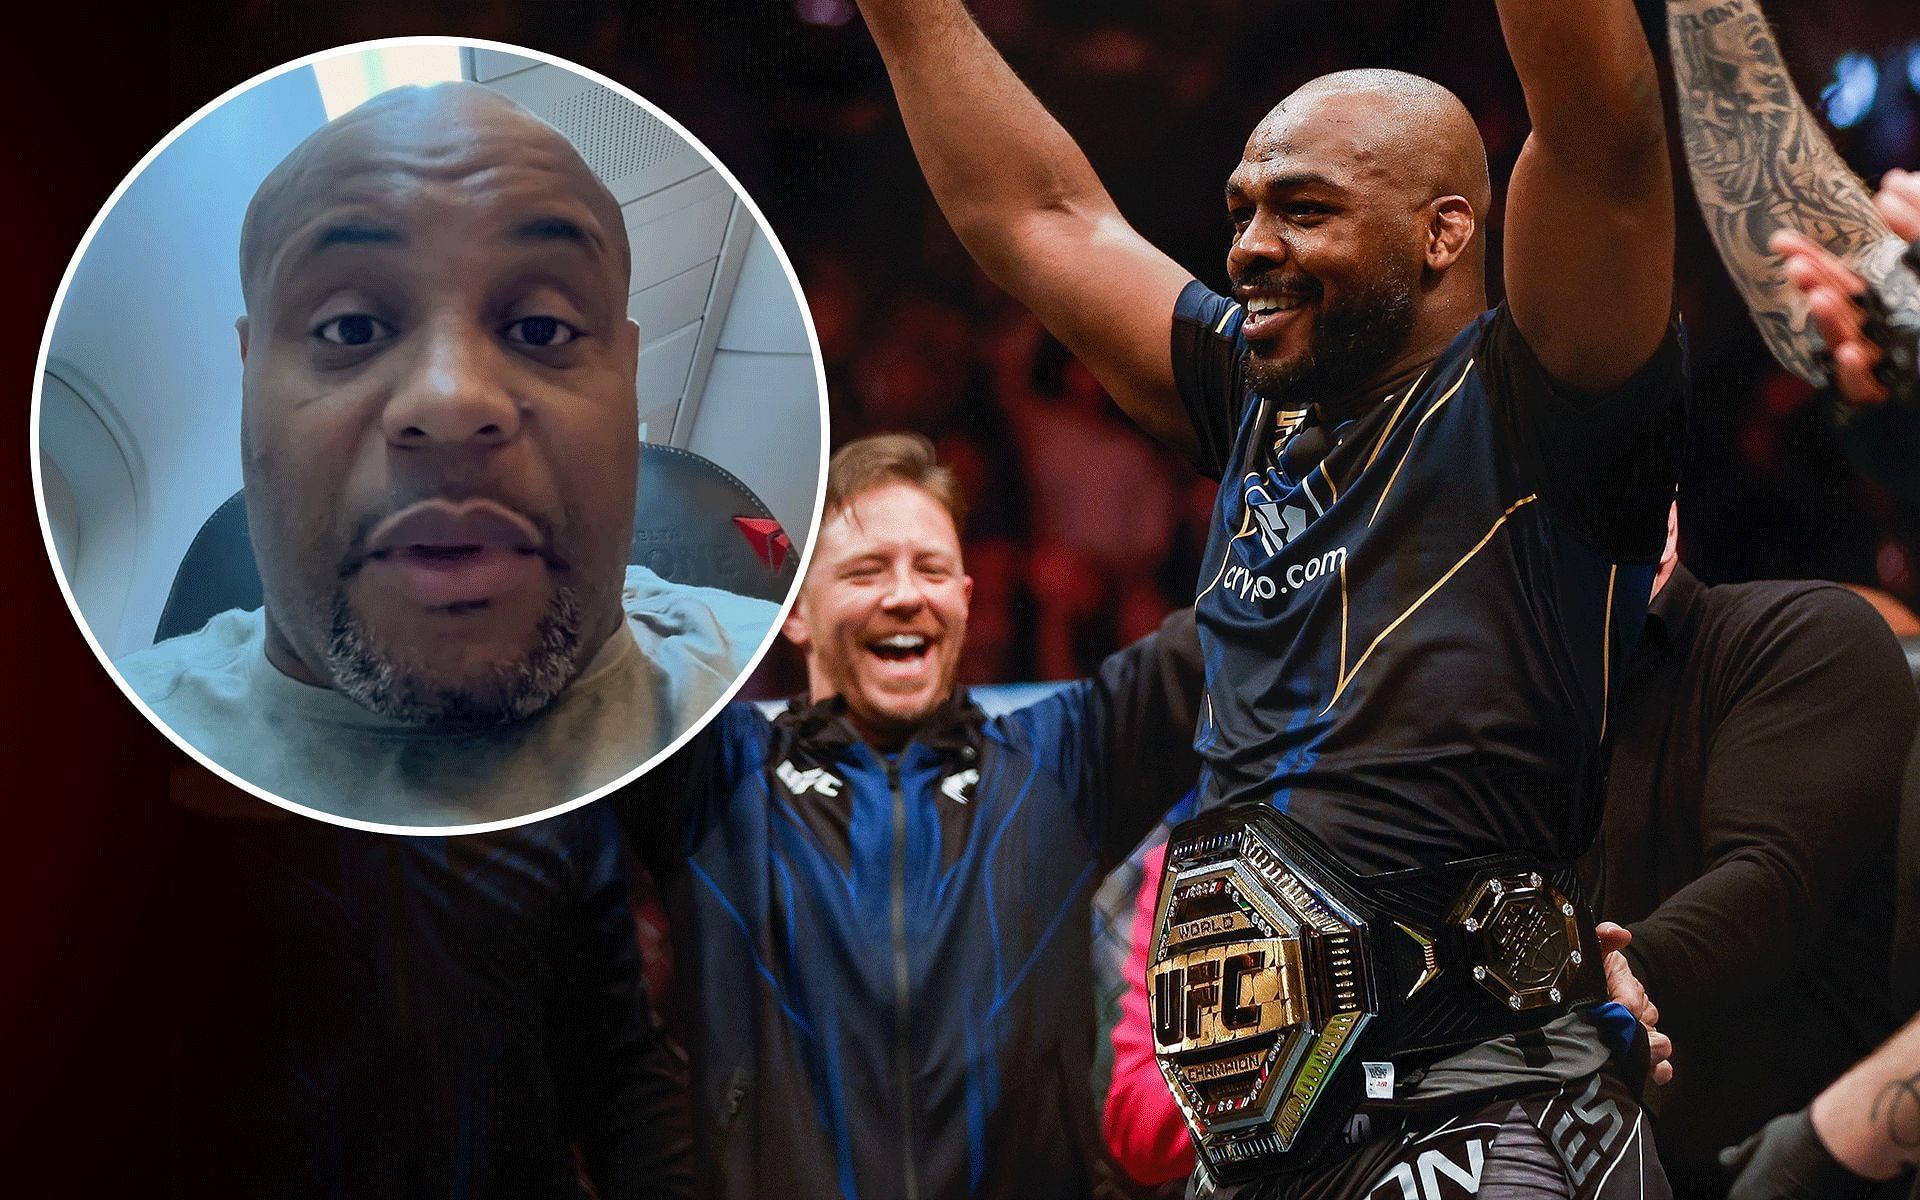 Daniel Cormier (inset) praised Jon Jones (right) for being clever in picking opponents [Images courtesy: @dc_mma on Instagram and Getty]